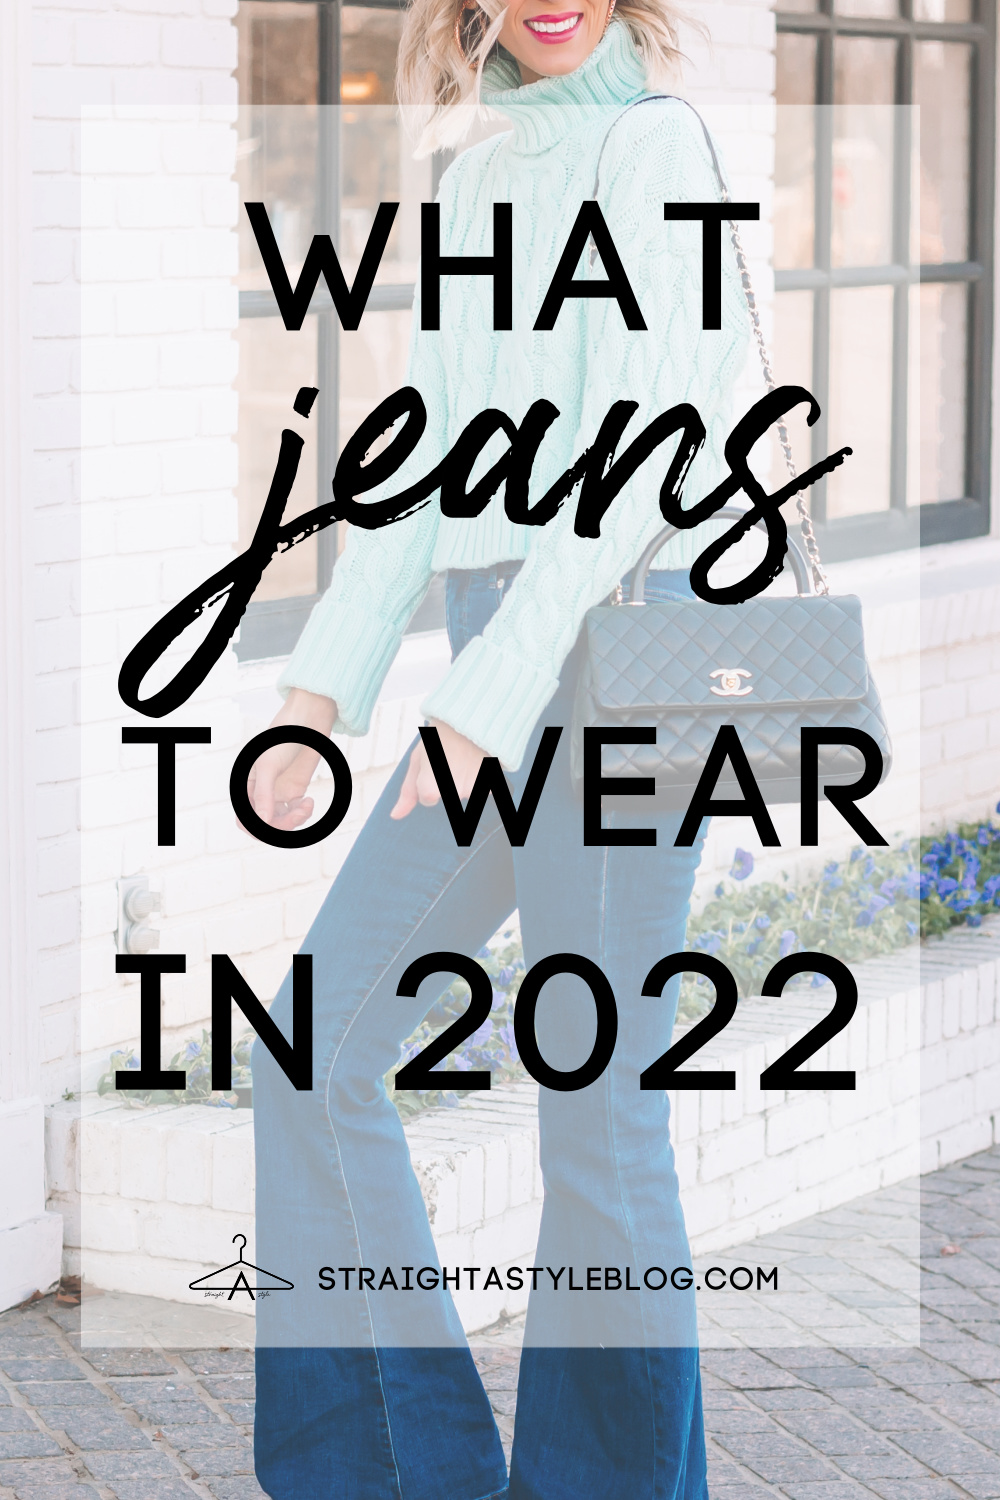 Flare Jeans are in Style for 2022 - Straight A Style